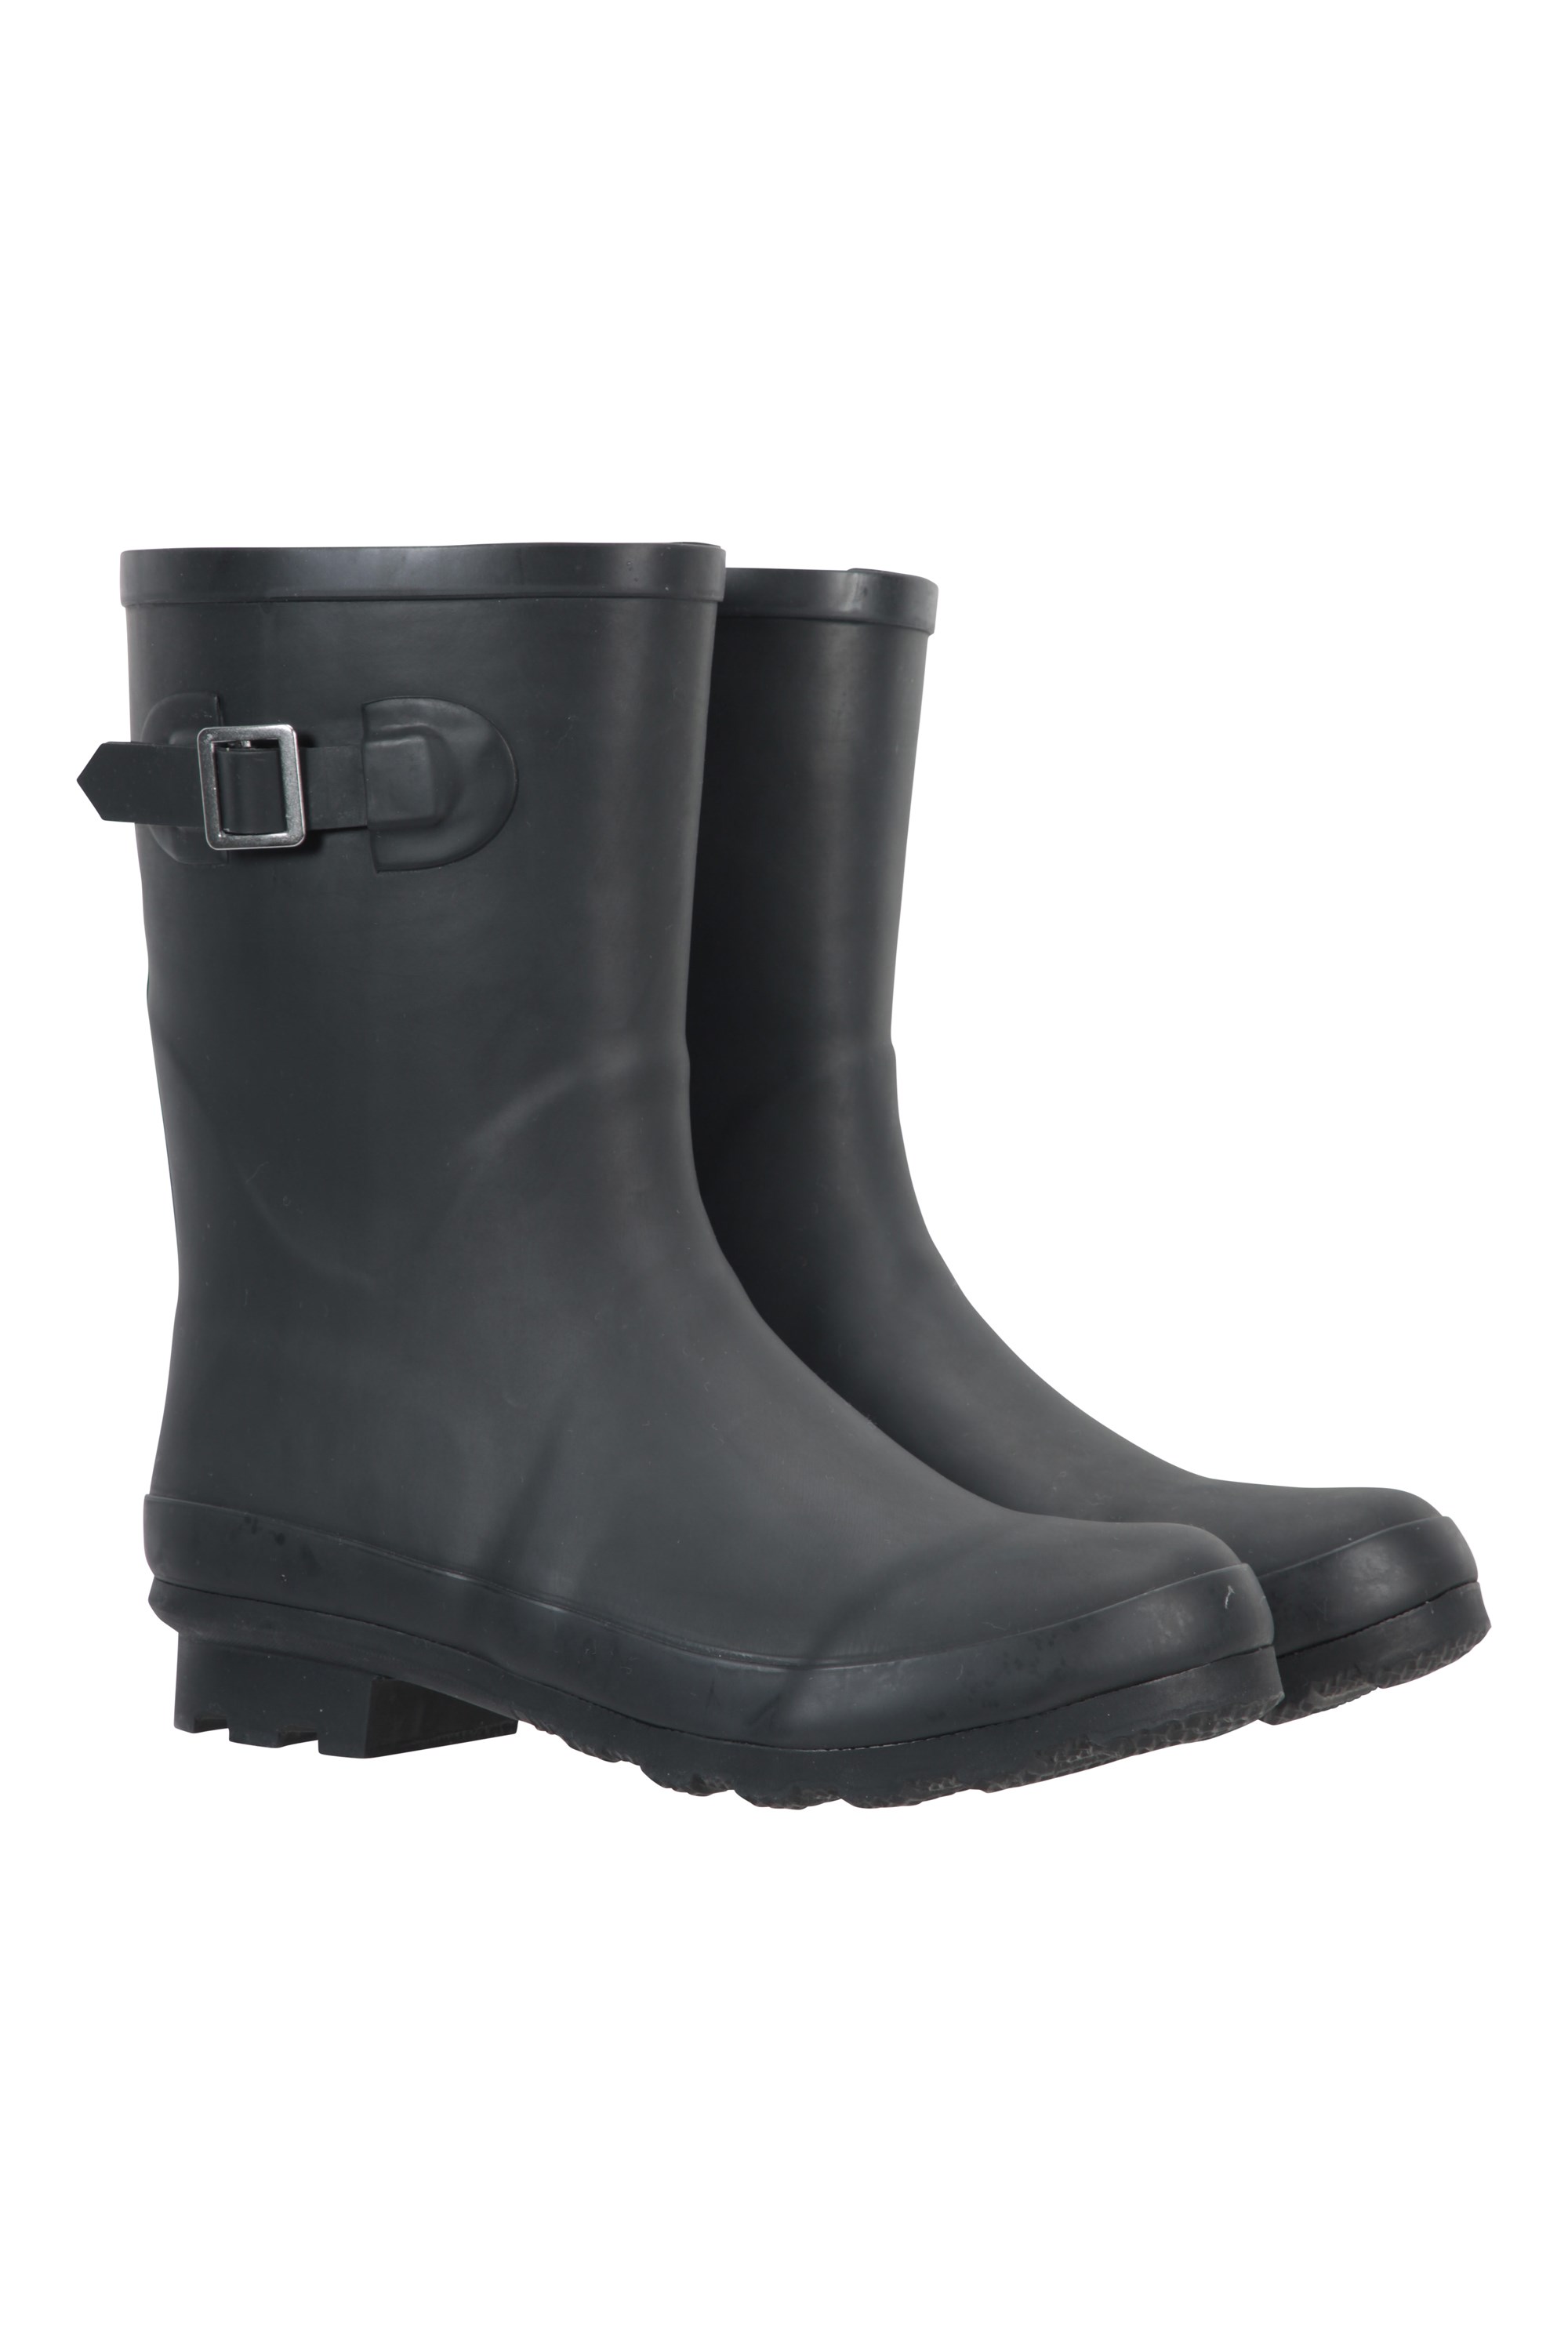 Womens Mid-Height Rubber Wellies - Black